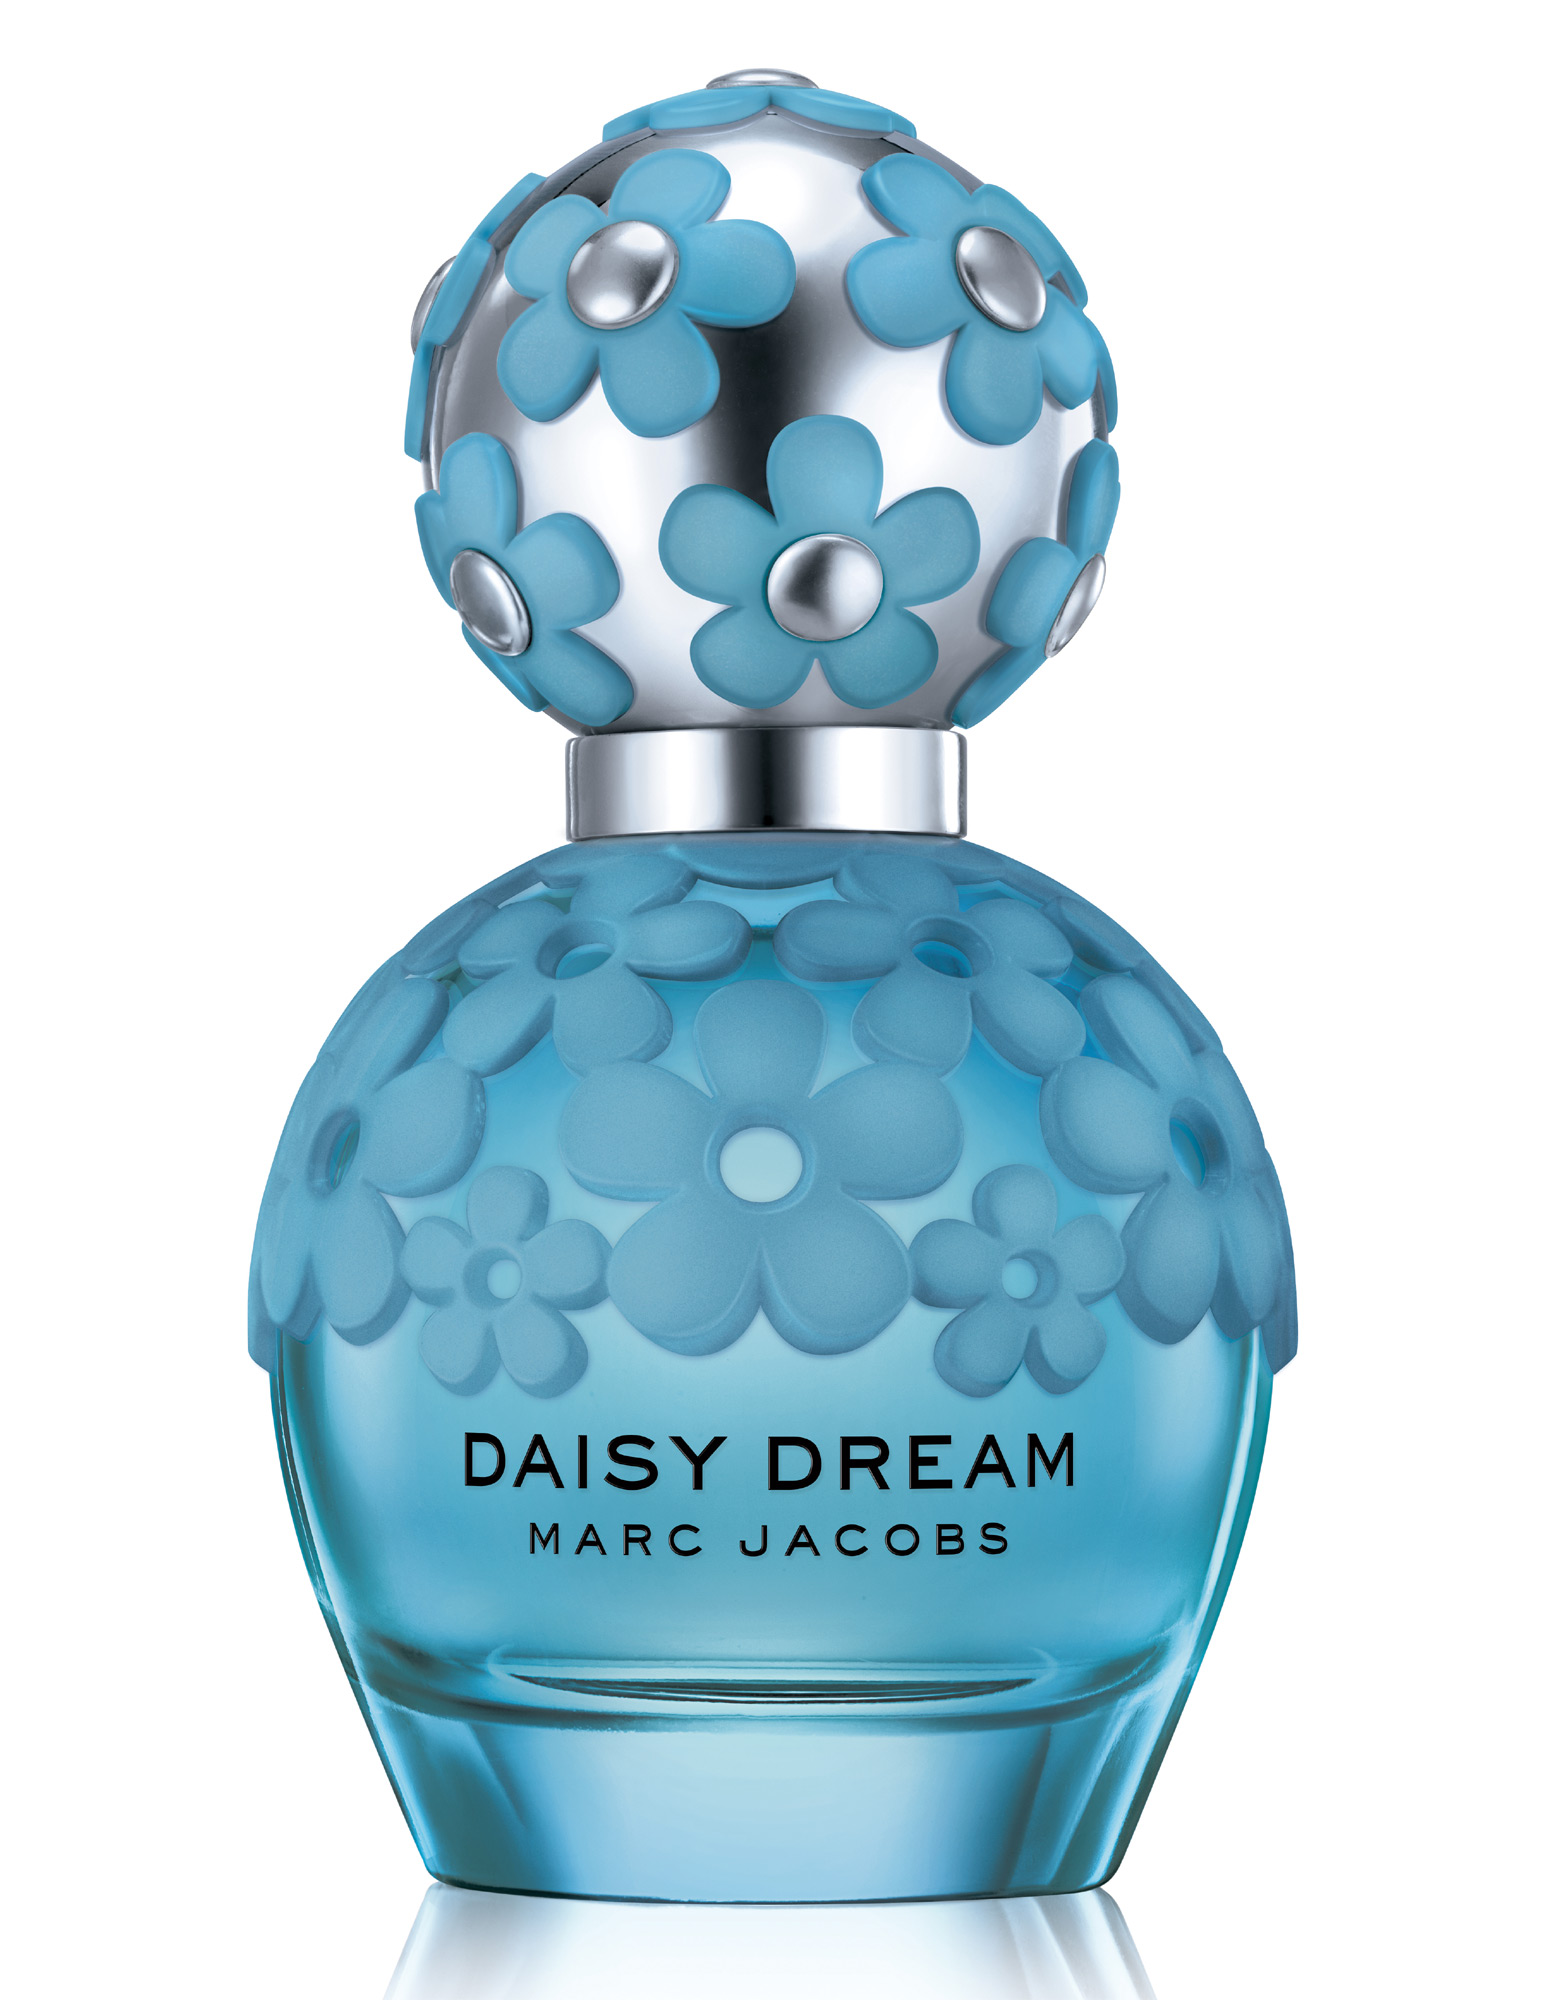 Daisy Dream Forever Marc Jacobs perfume - a new fragrance for women 2015